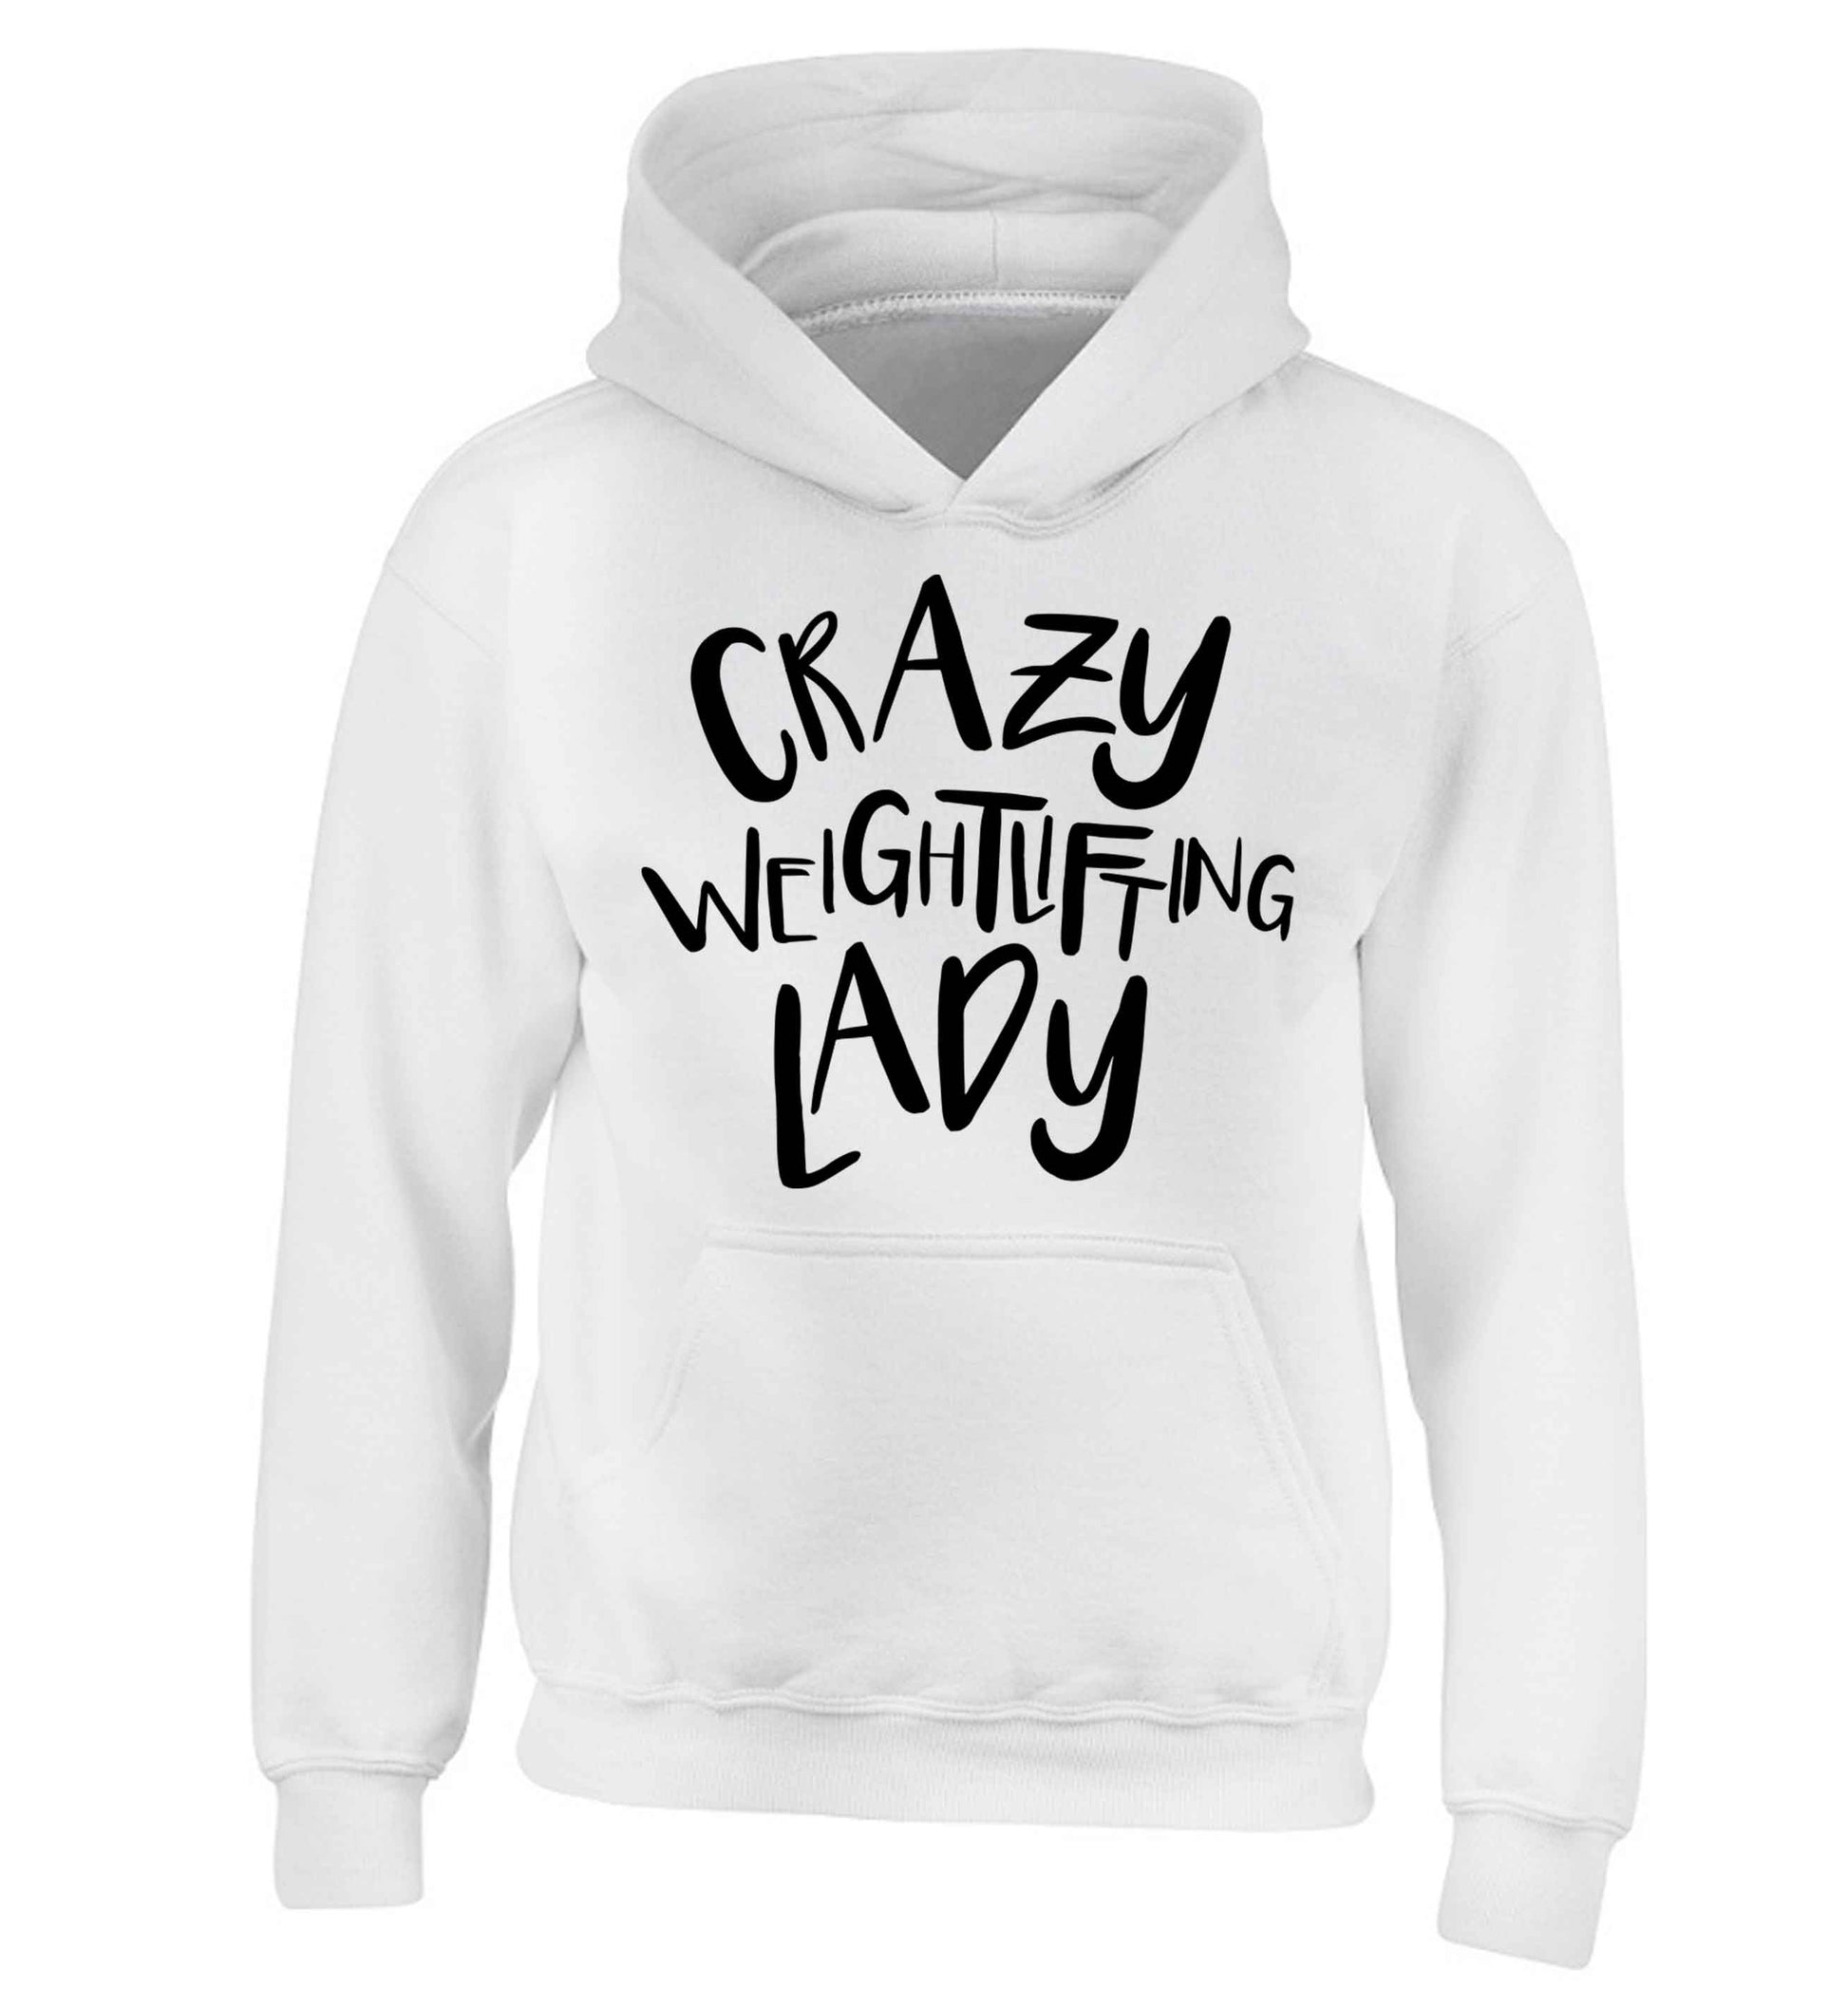 Crazy weightlifting lady children's white hoodie 12-13 Years